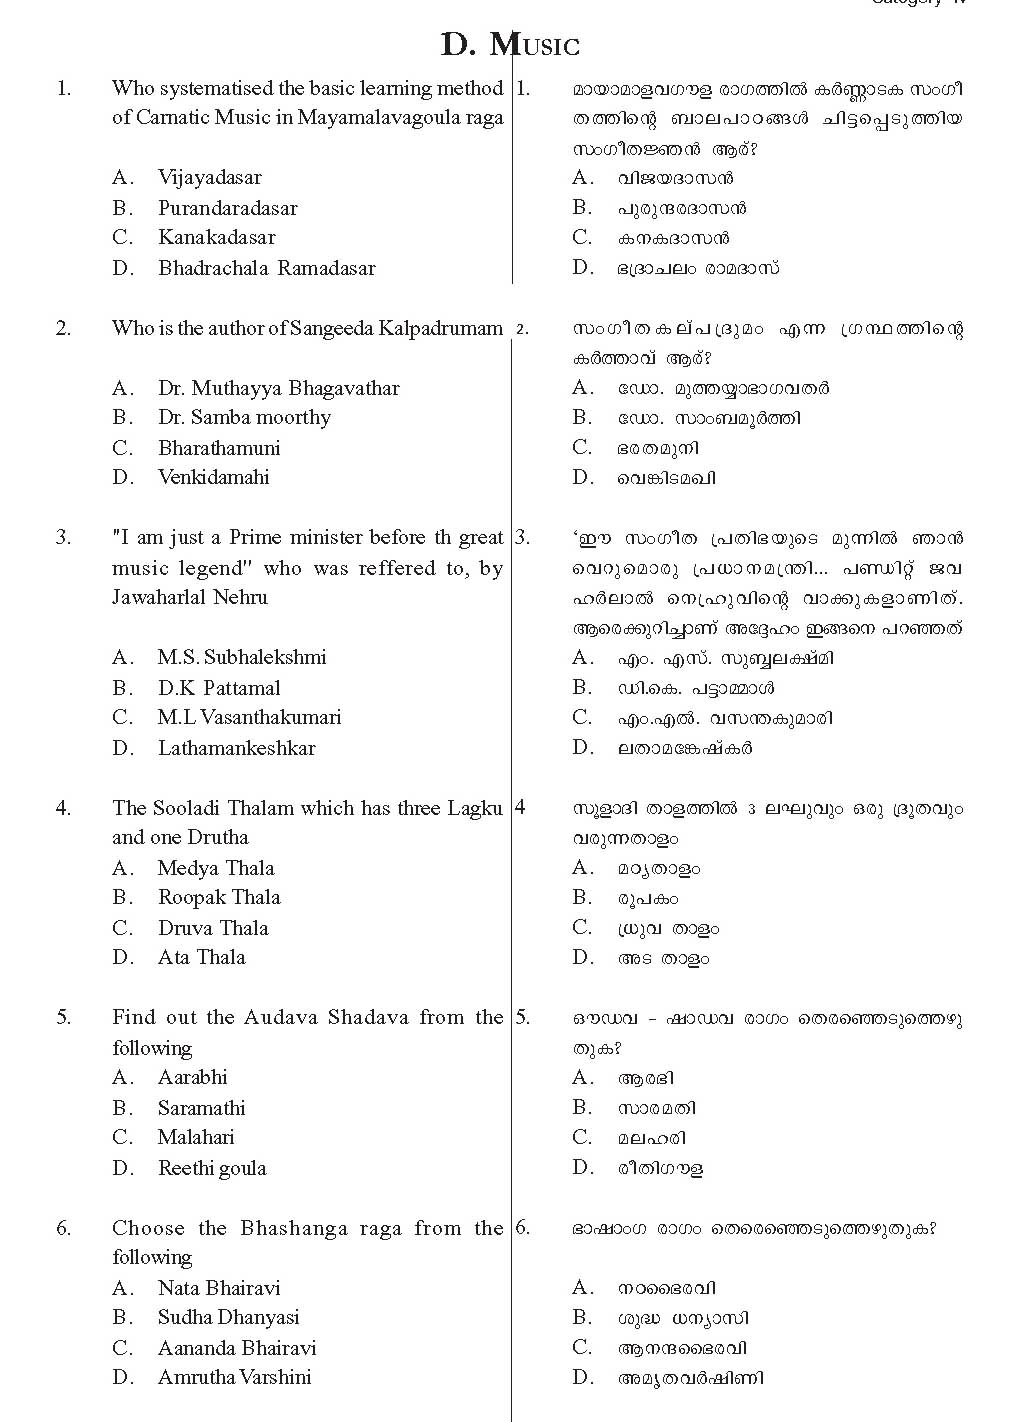 KTET Category IV Music Teacher Exam Sample Question Paper with Answers 2012 1